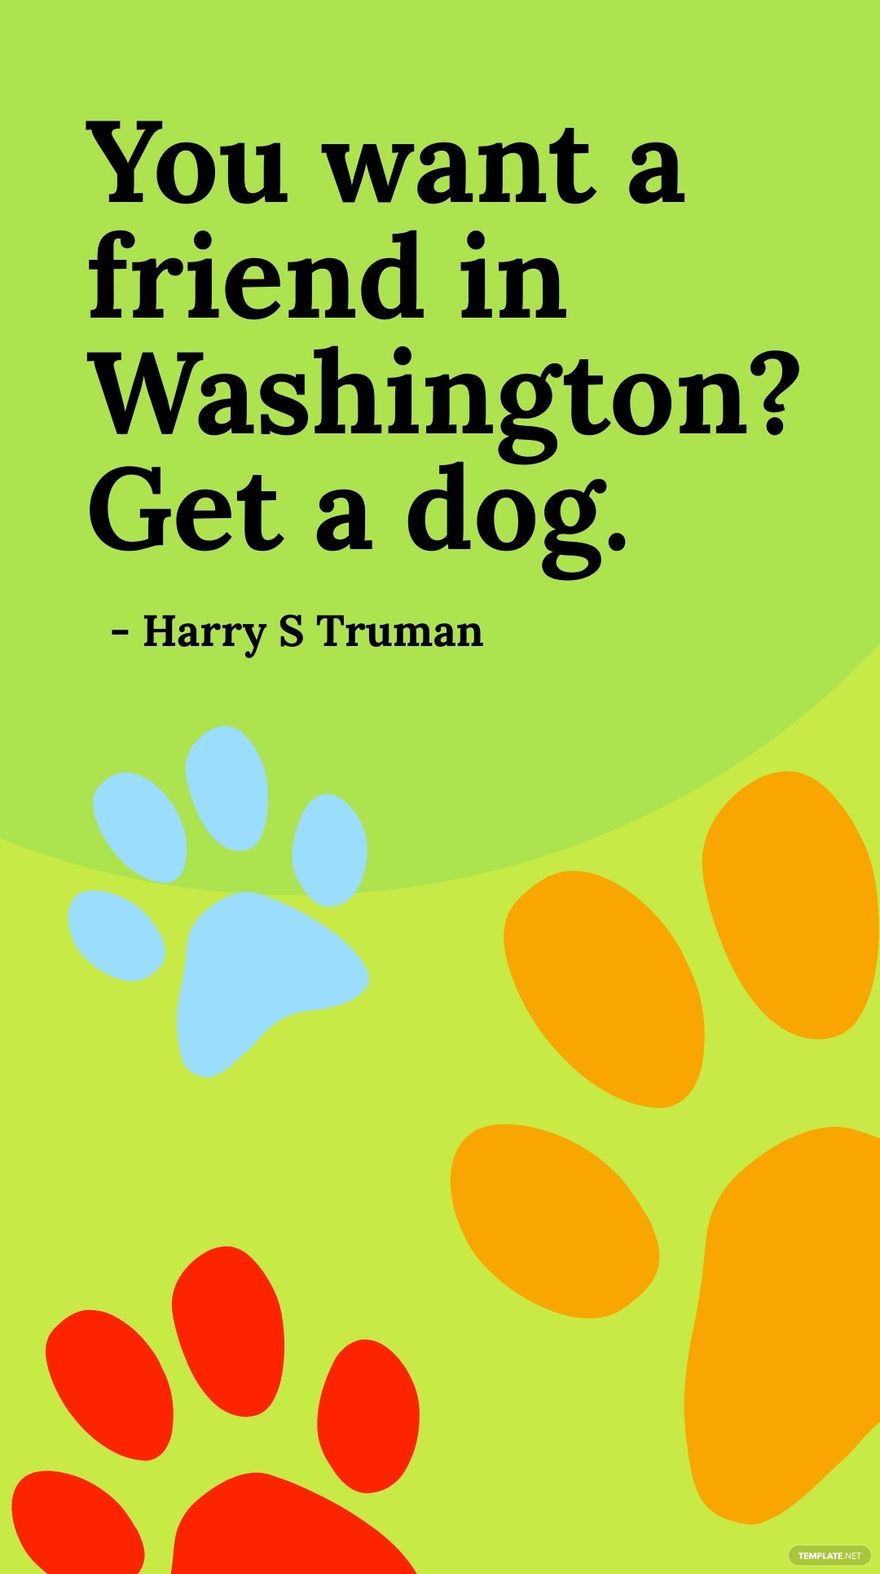 Harry S Truman - You want a friend in Washington? Get a dog.